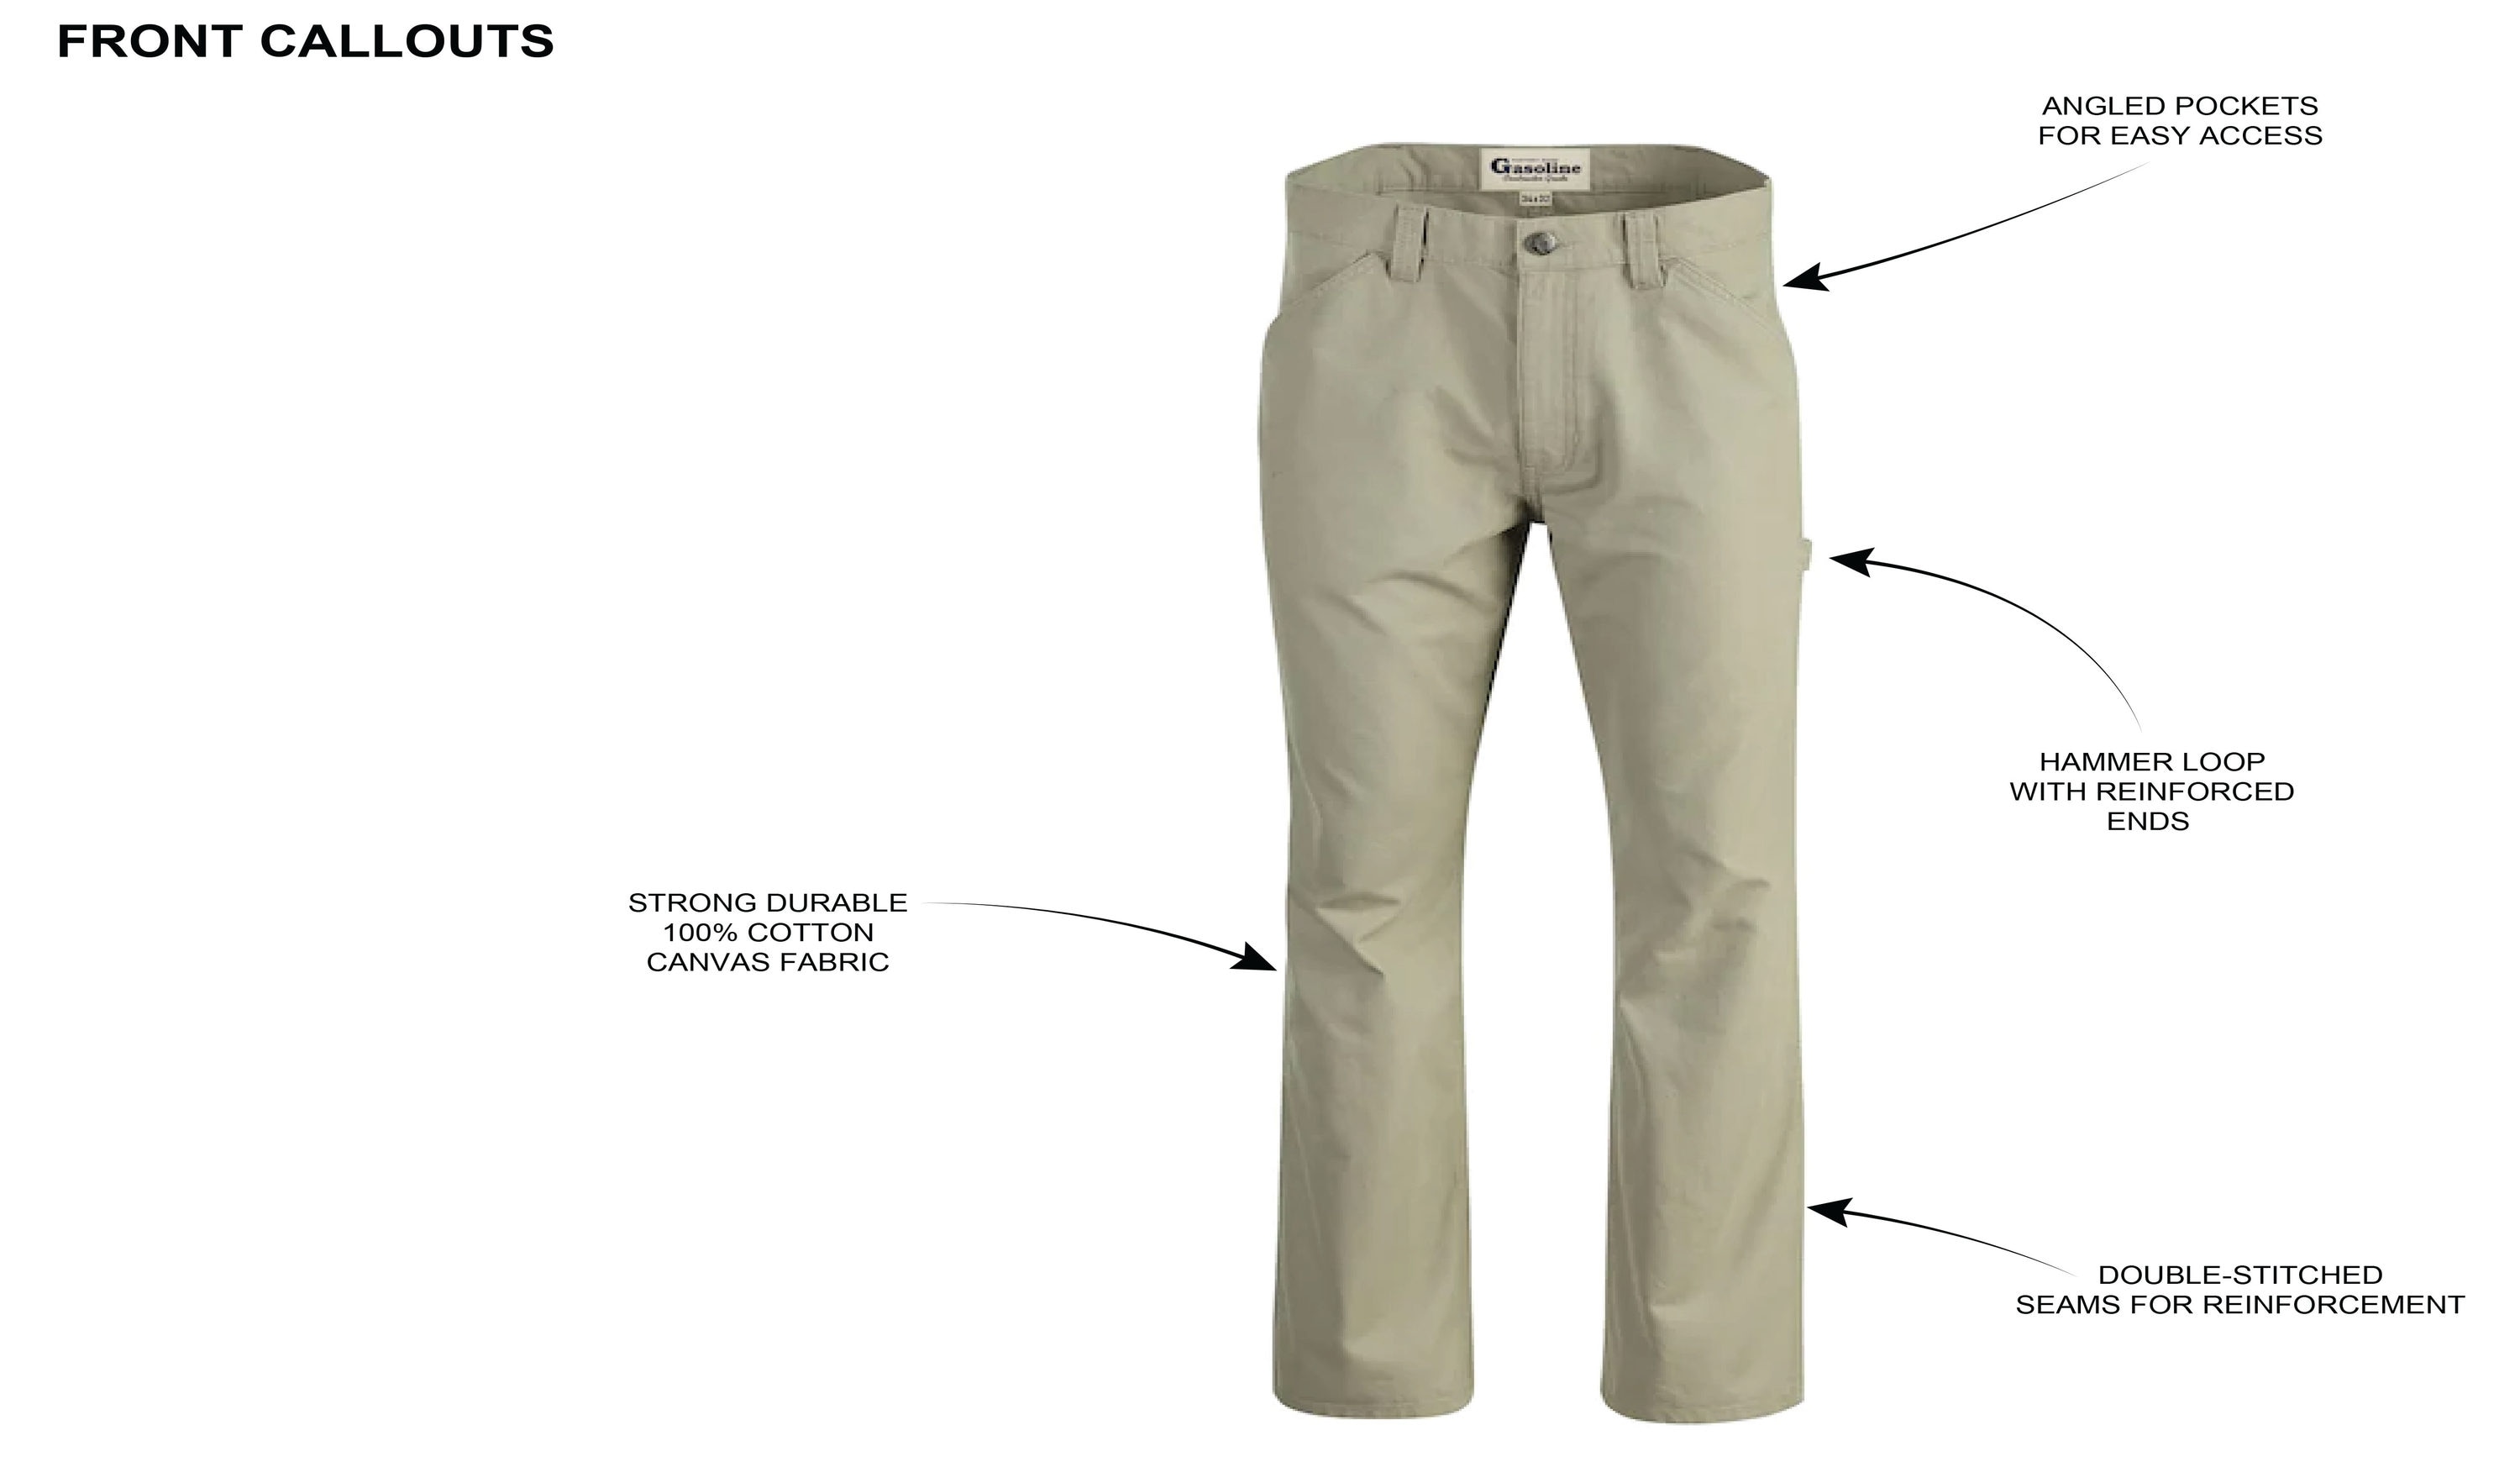 Dickies 100% cotton Work Pants at Lowes.com